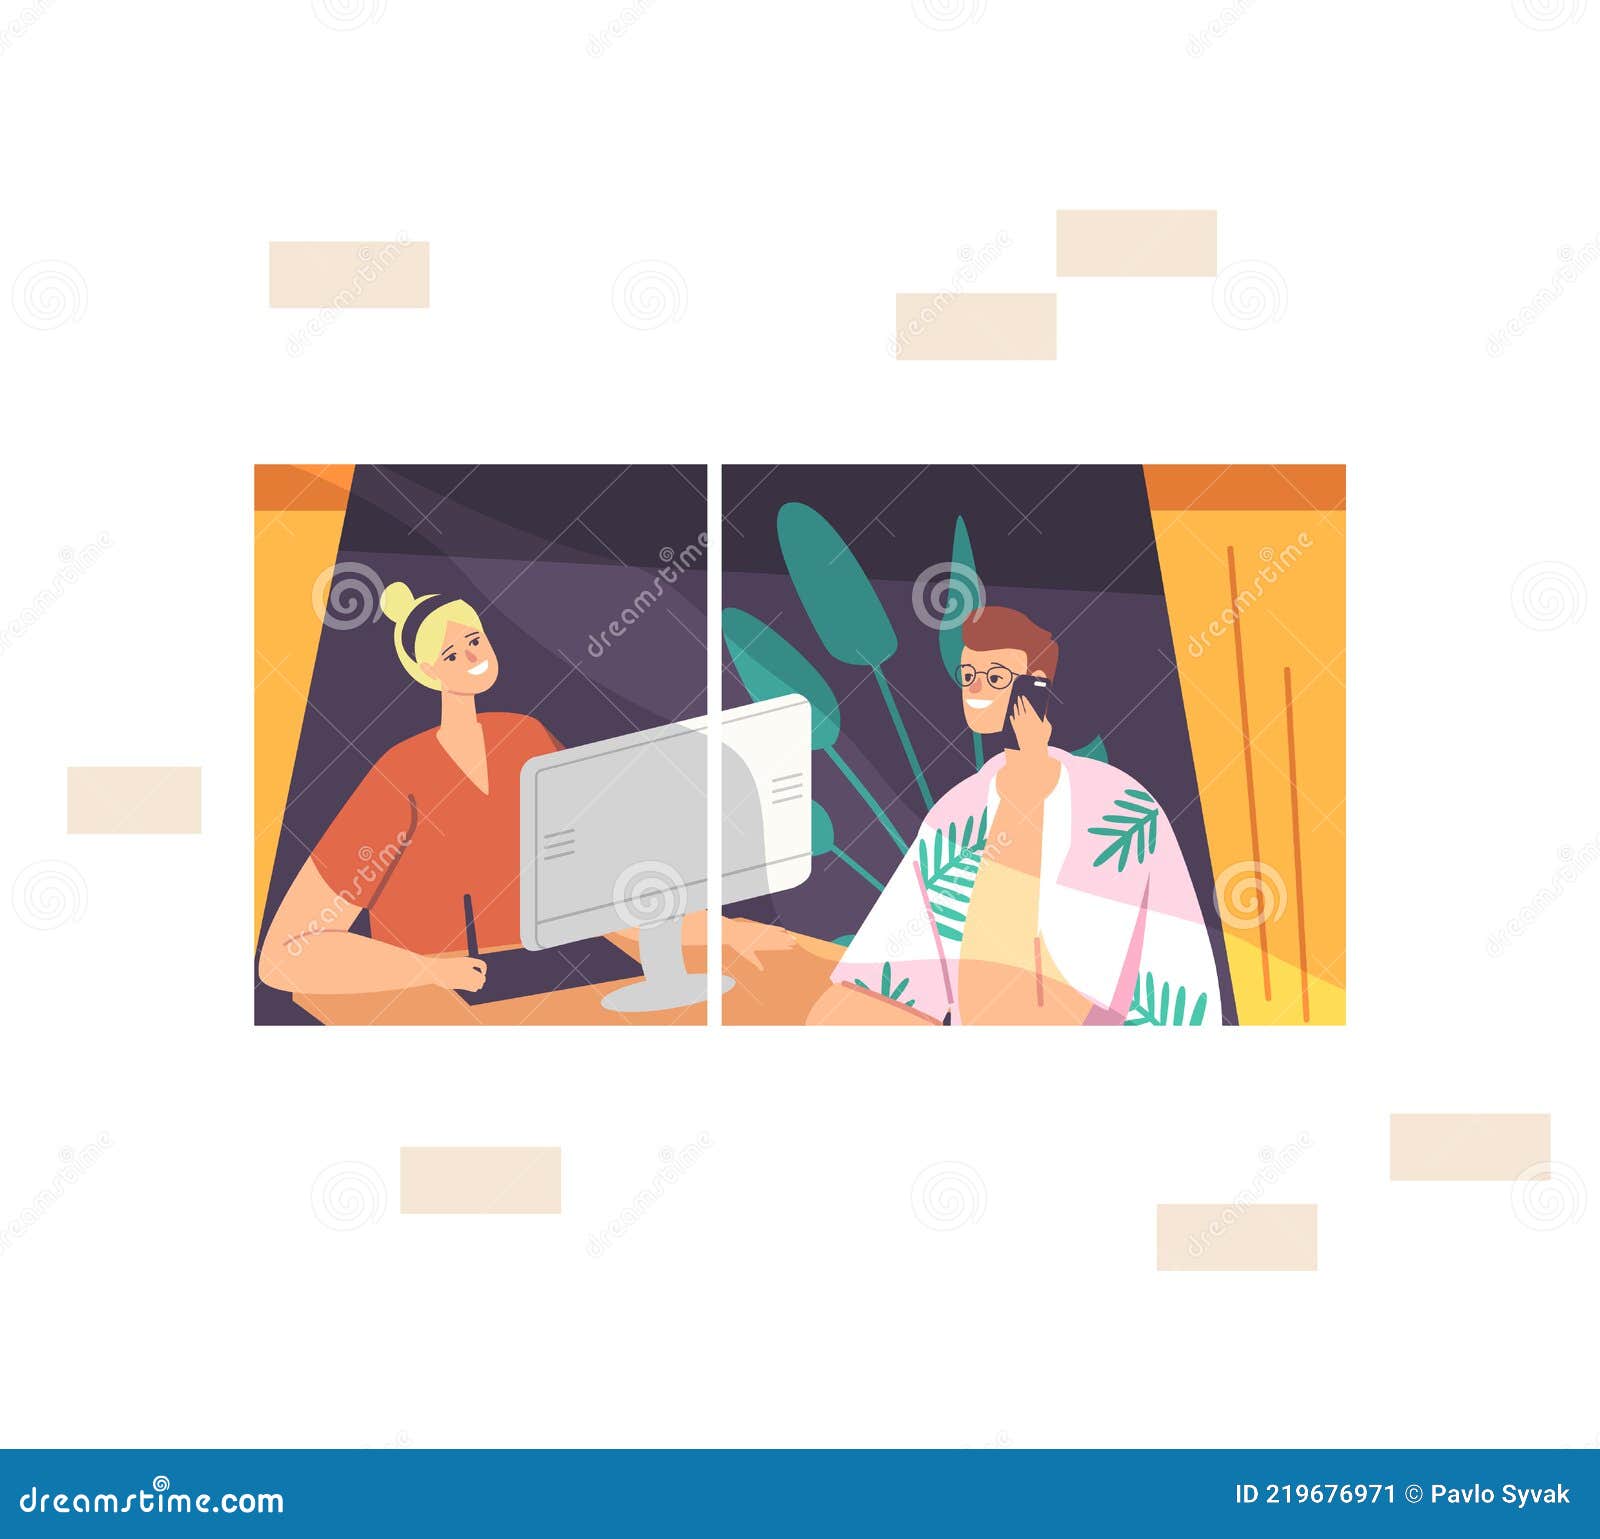 freelance selfemployed occupation, remote workplace concept. man and woman freelancers characters sitting at window